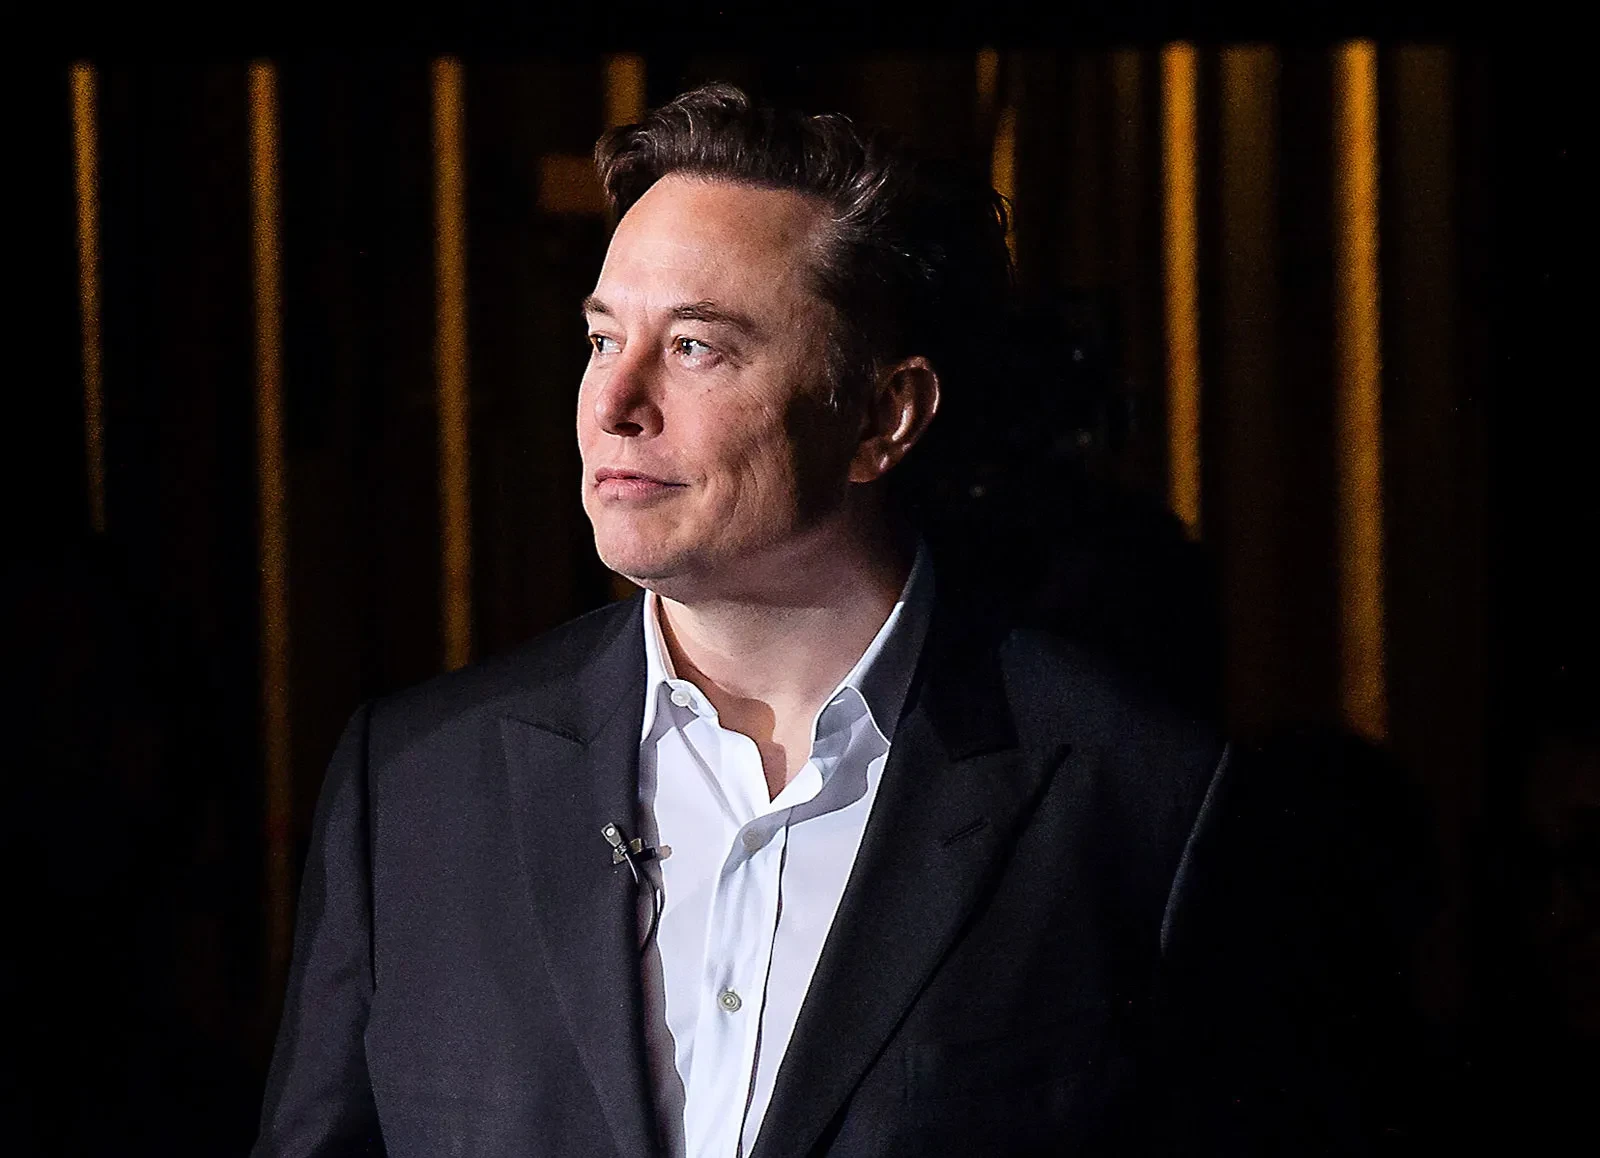 Elon Musk is the new CEO of Twitter.